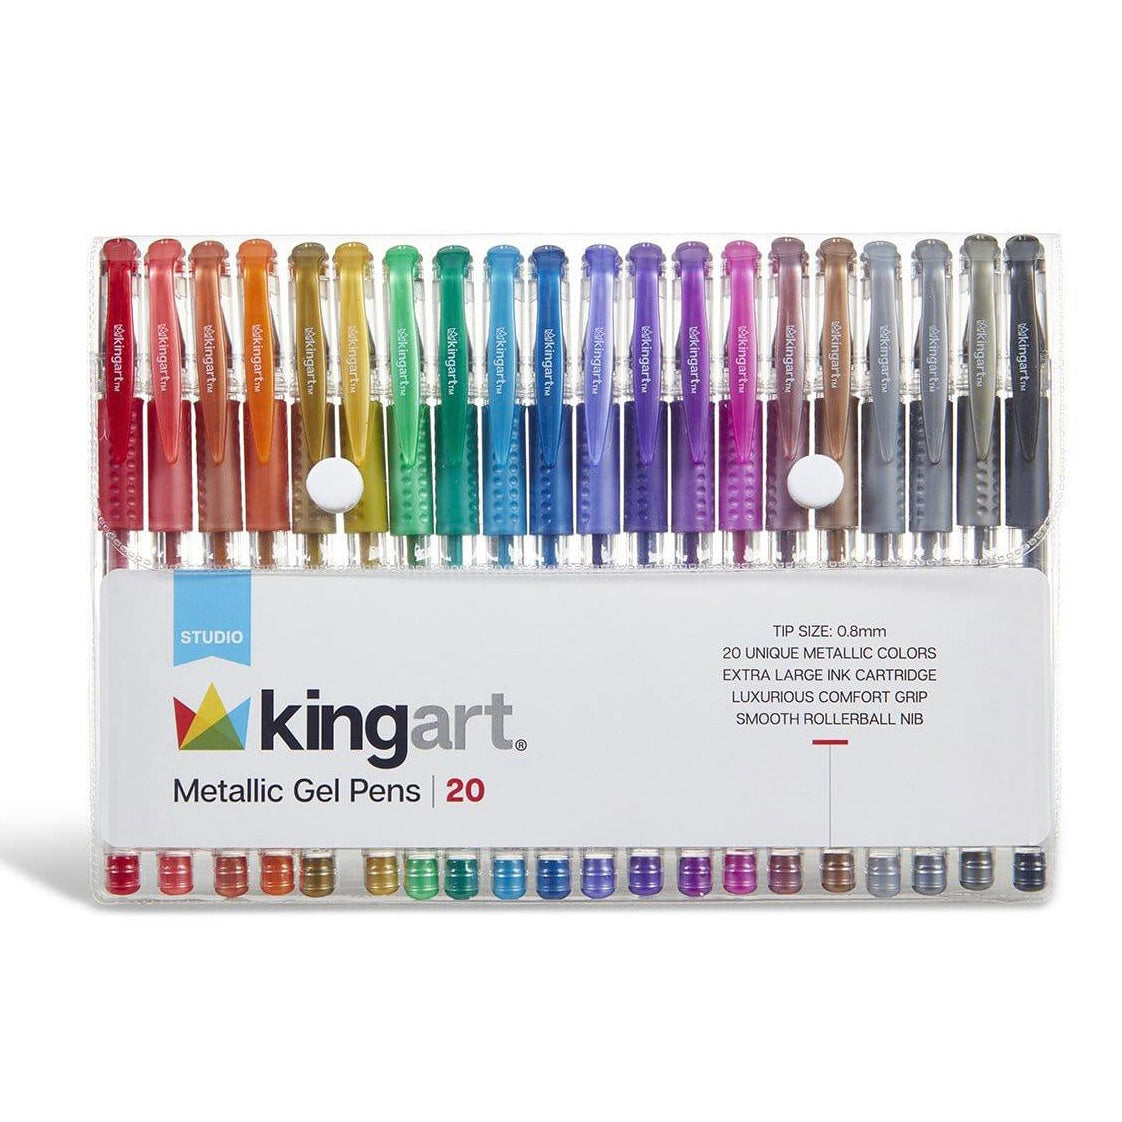  KINGART 401-24 Mini Neon, Metallic & Glitter Rollerball Gel Pens,  24 Fun-size Colors, Great for All Ages, Writing, Coloring, Doodling,  Scrapbooking, Journaling & More : Office Products